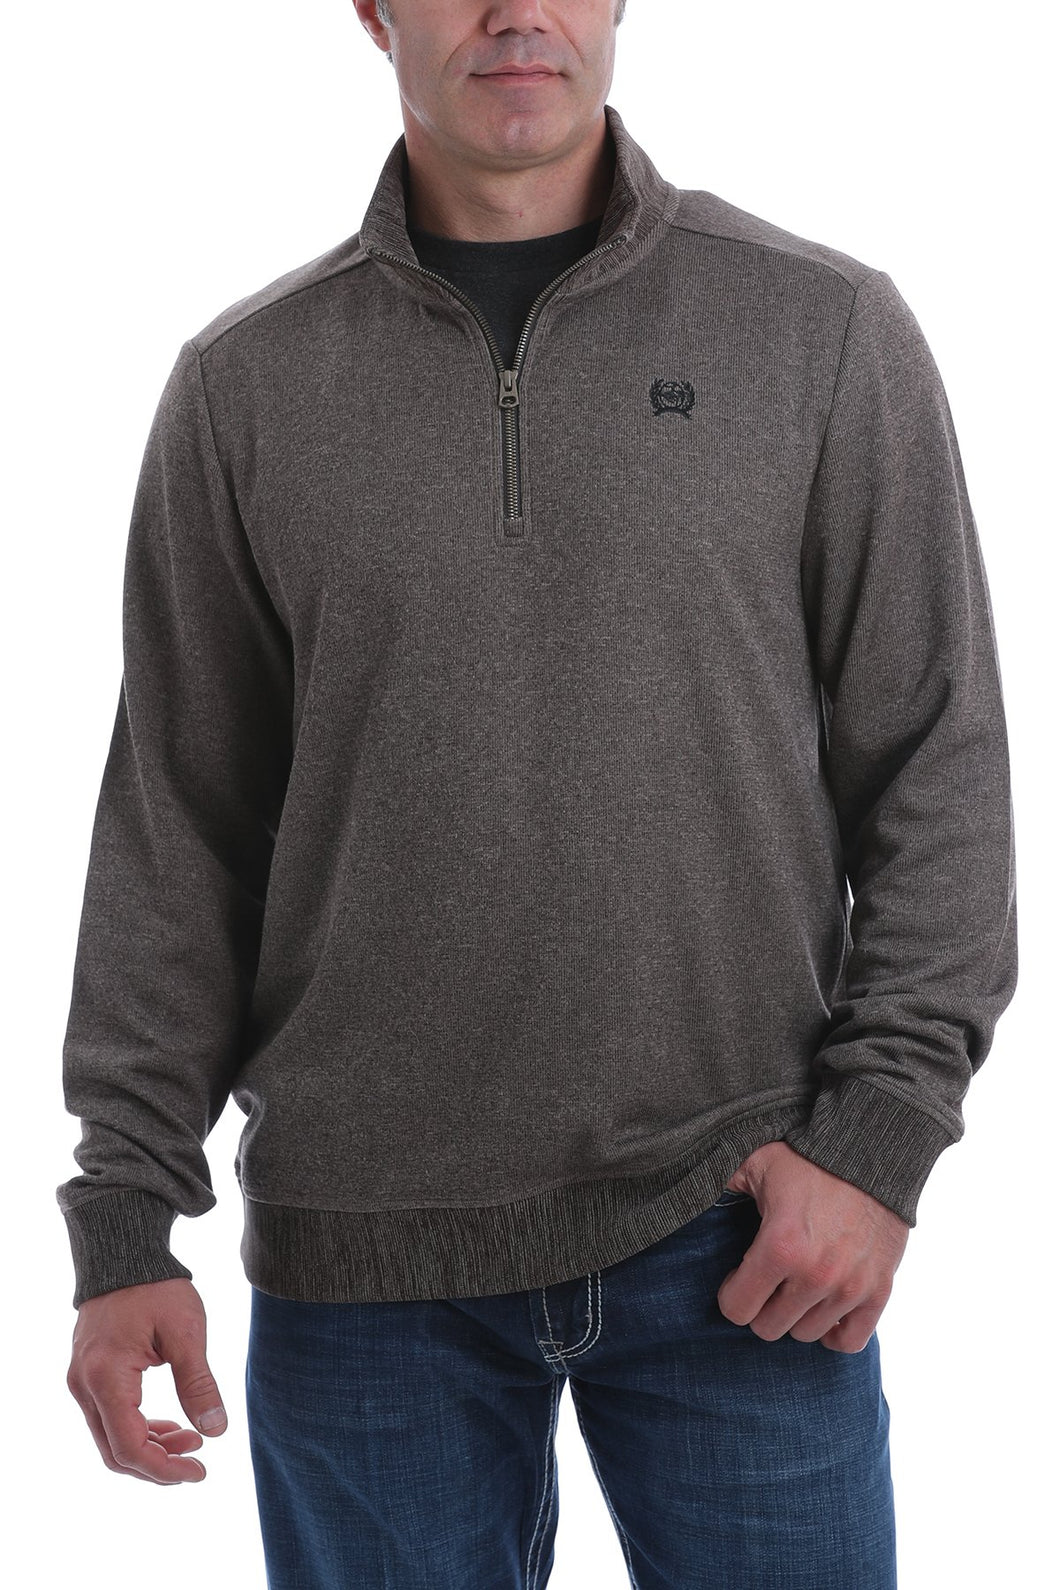 MENS CINCH SWEATER KNIT PULLOVER 1536002